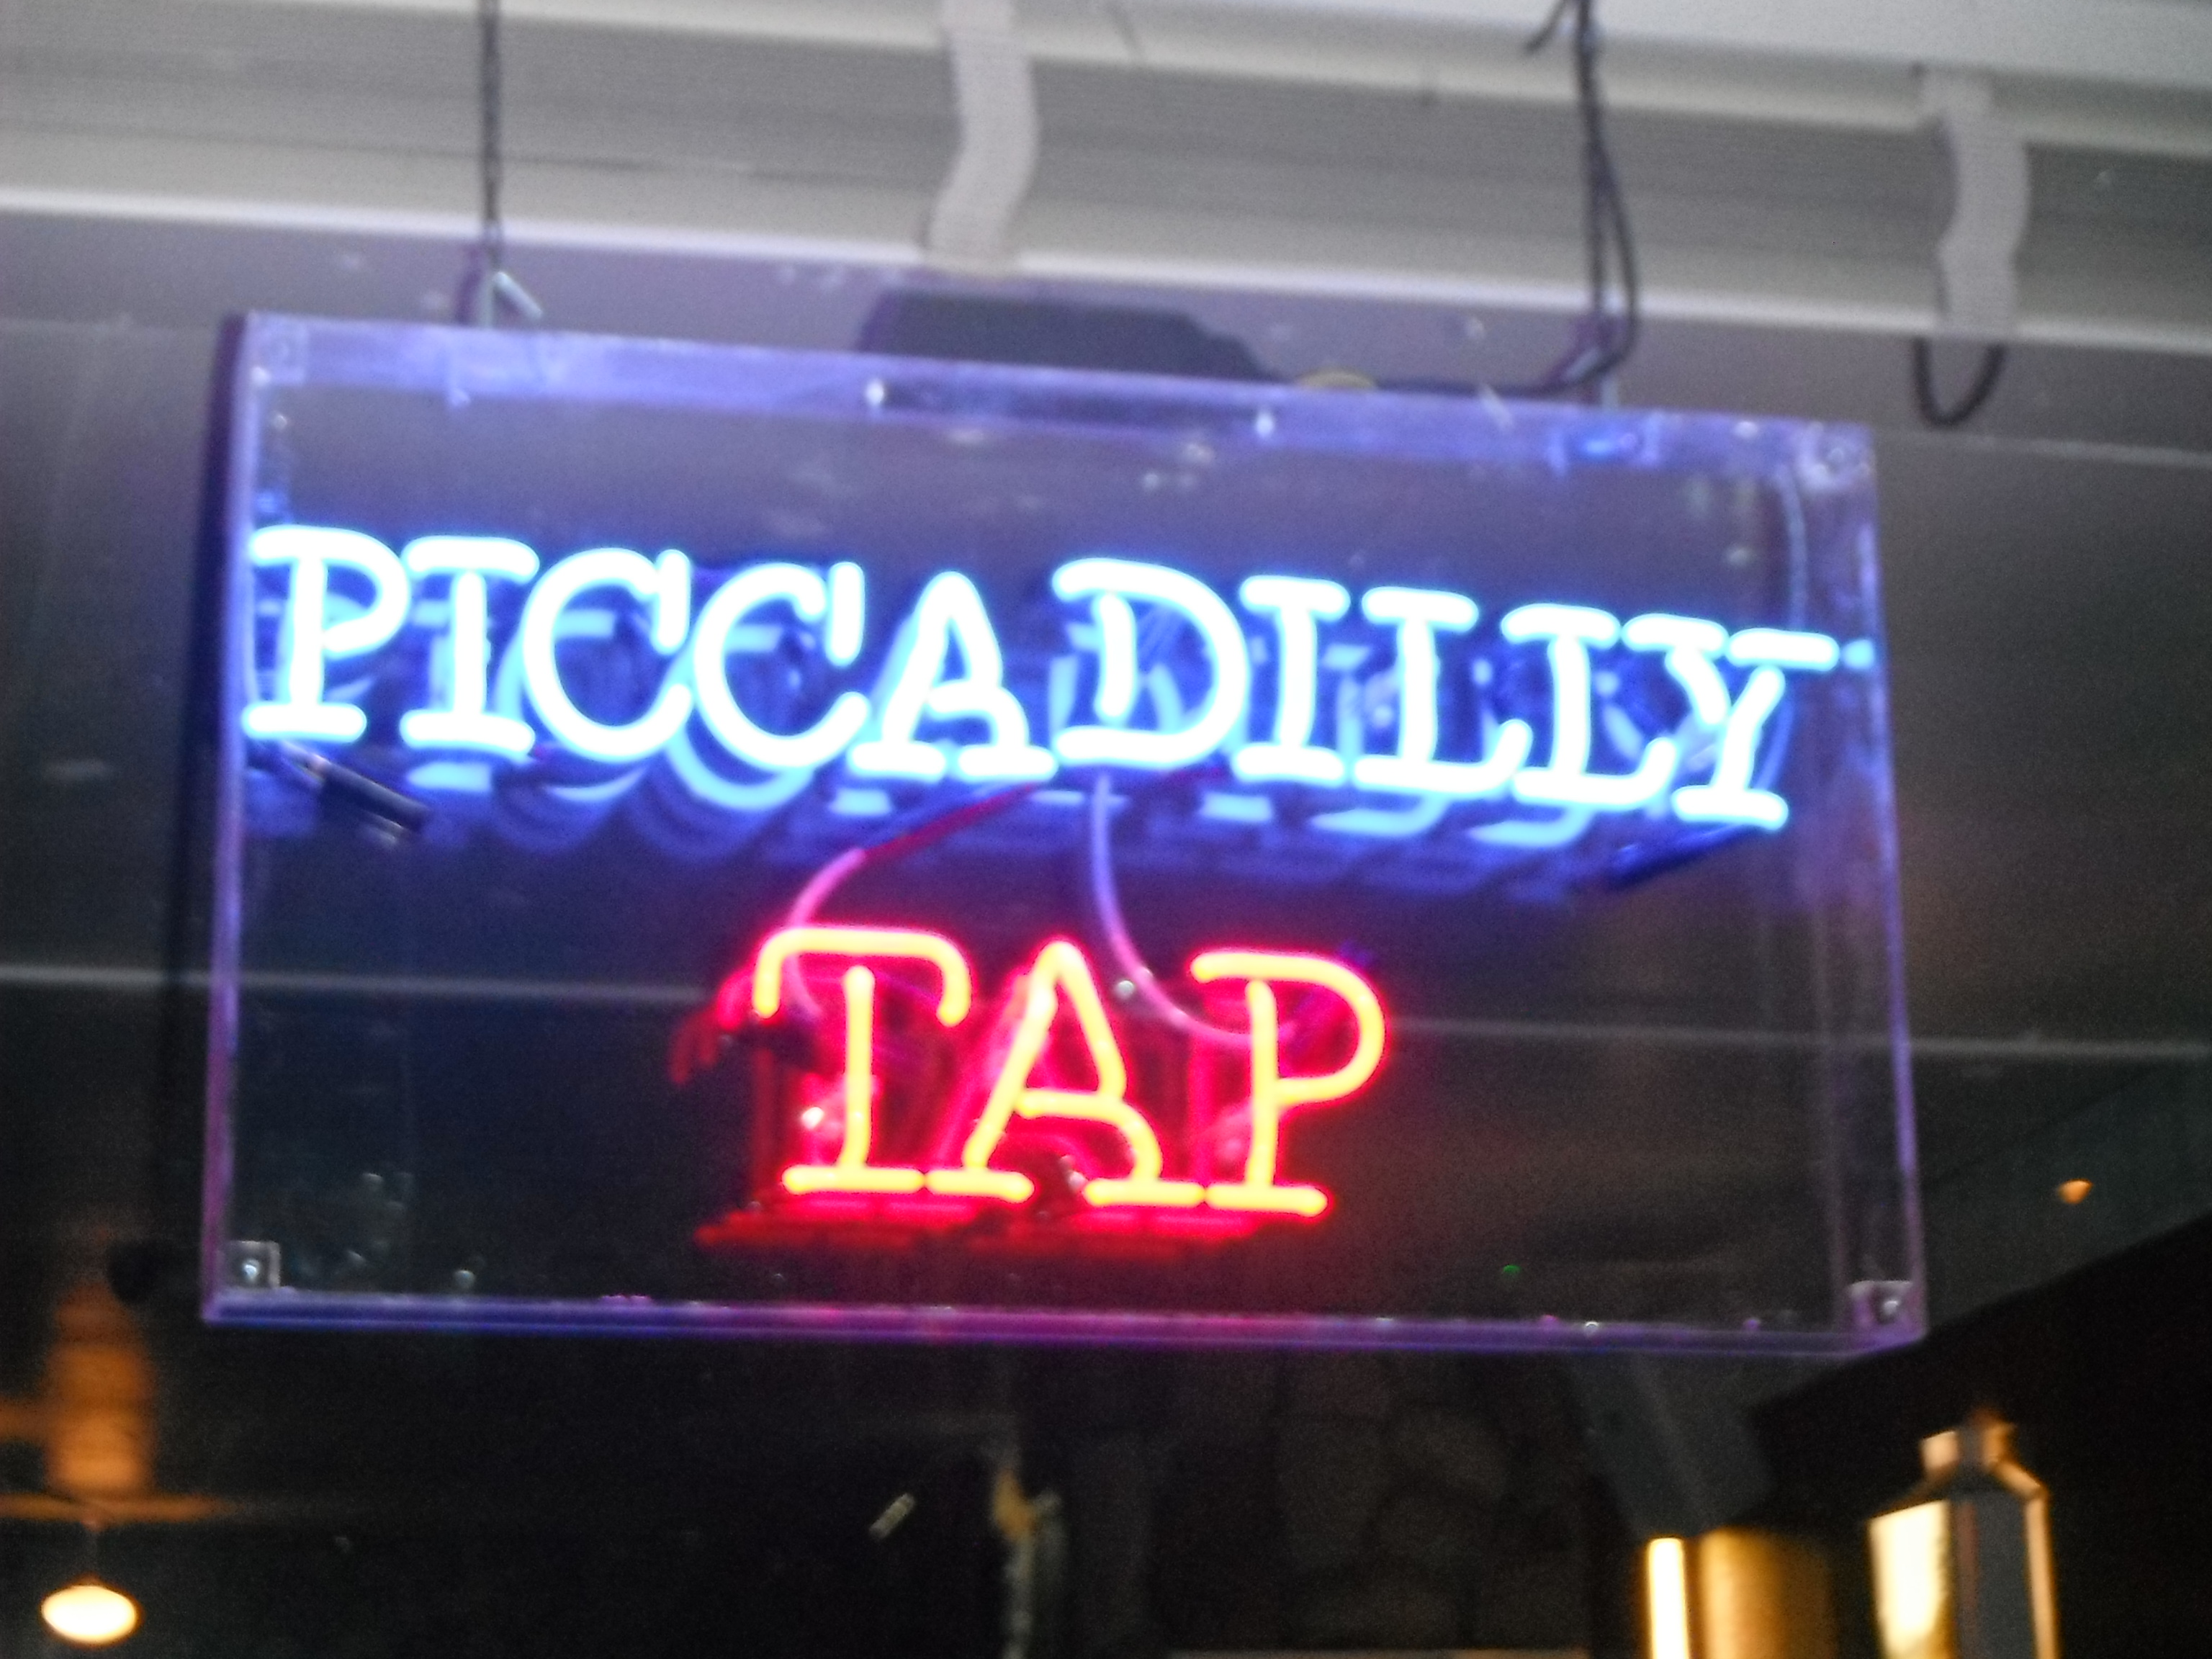 Photo taken by me – the Piccadilly Tap neon pub sign